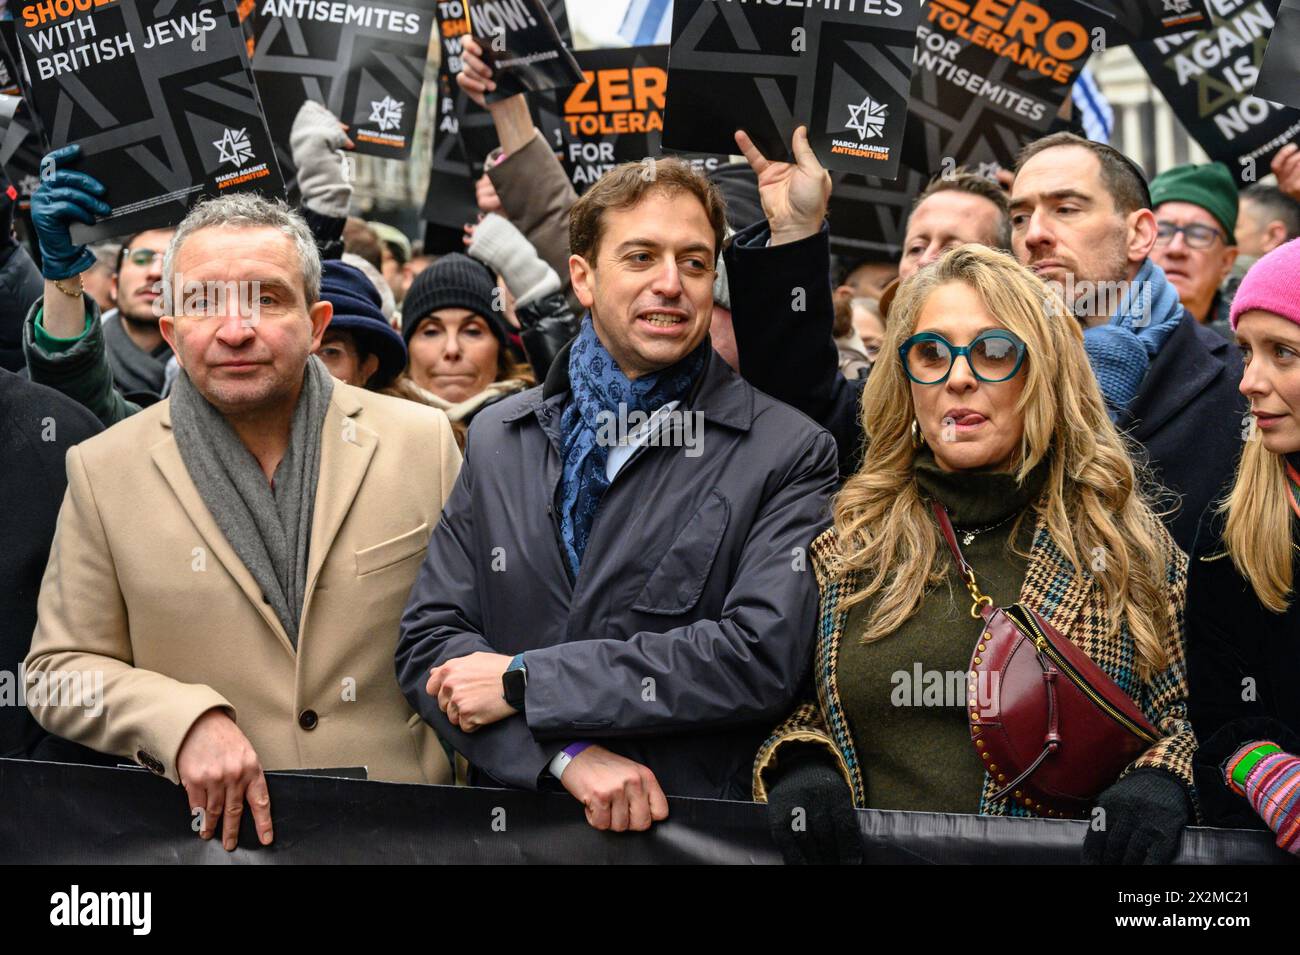 Gideon Falter - Chief Executive of Campaign Against Antisemitism. Vice Chairman of JNF UK. with actor Eddie Marsan and actress Tracy-Ann Oberman, taki Stock Photo